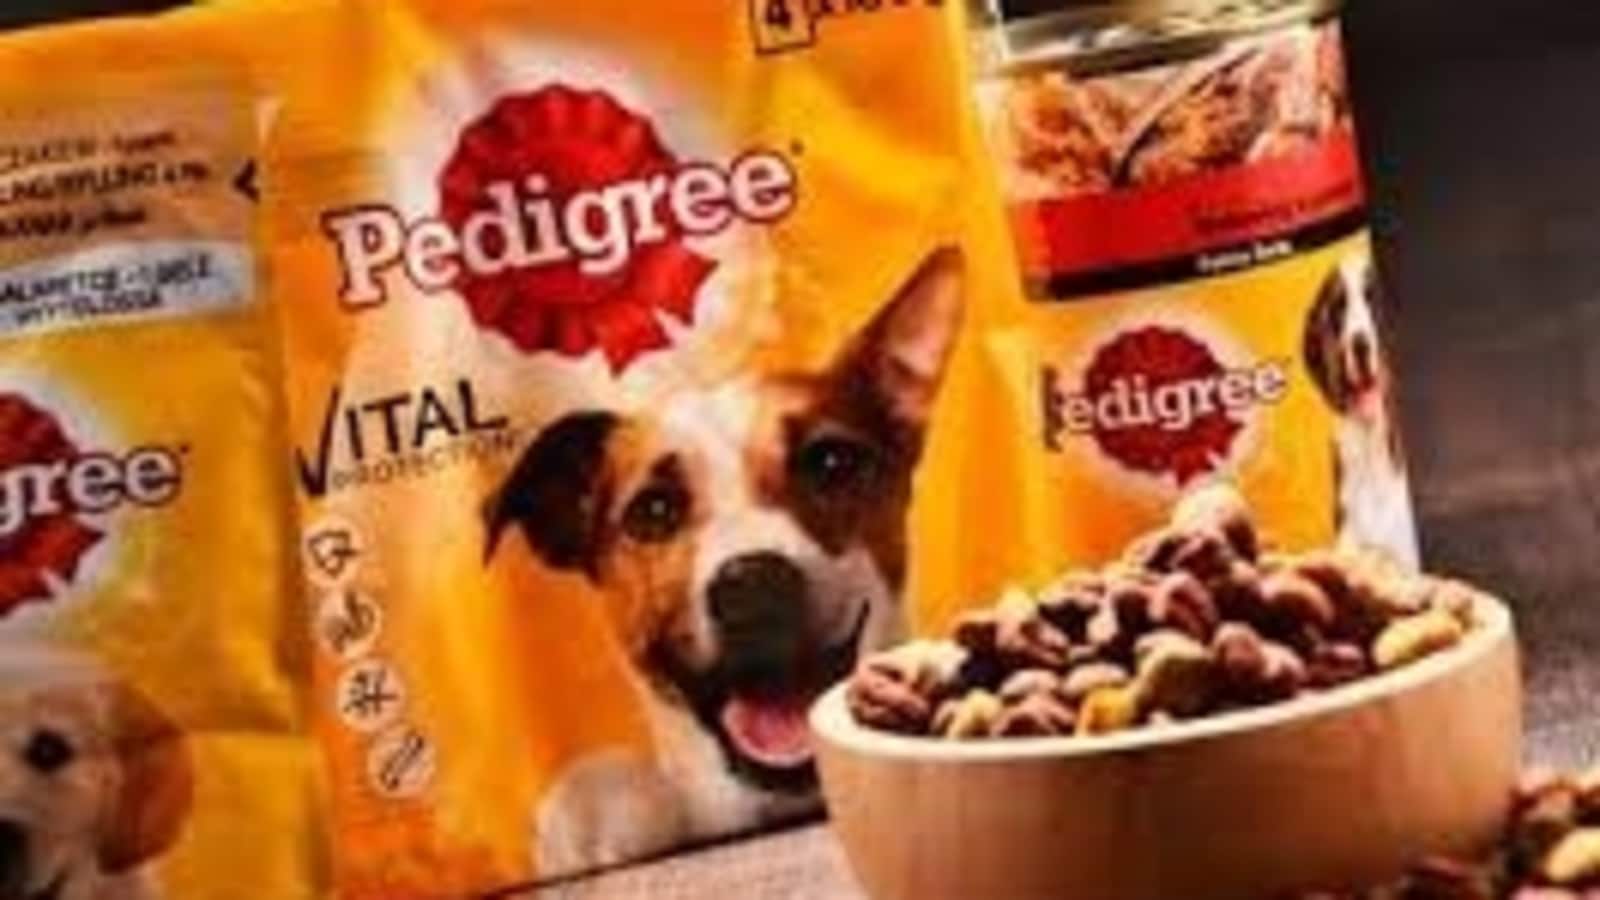 do not feed your dog pedigree